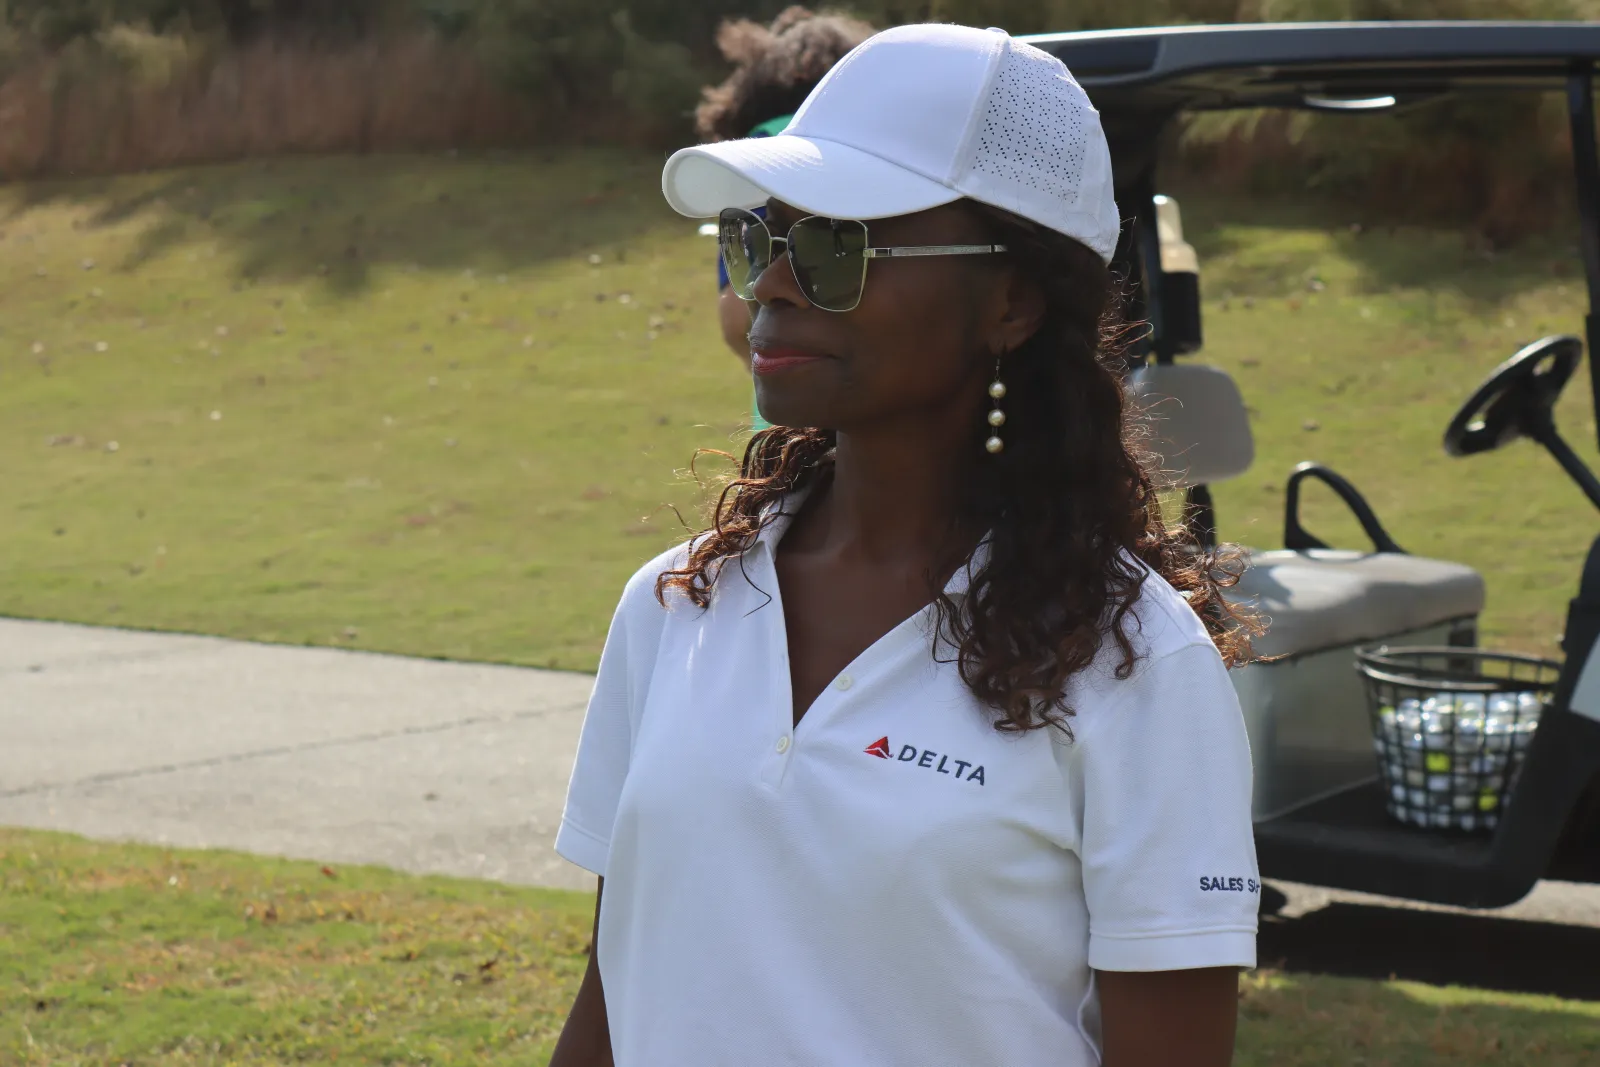 a woman wearing a white shirt and sunglasses